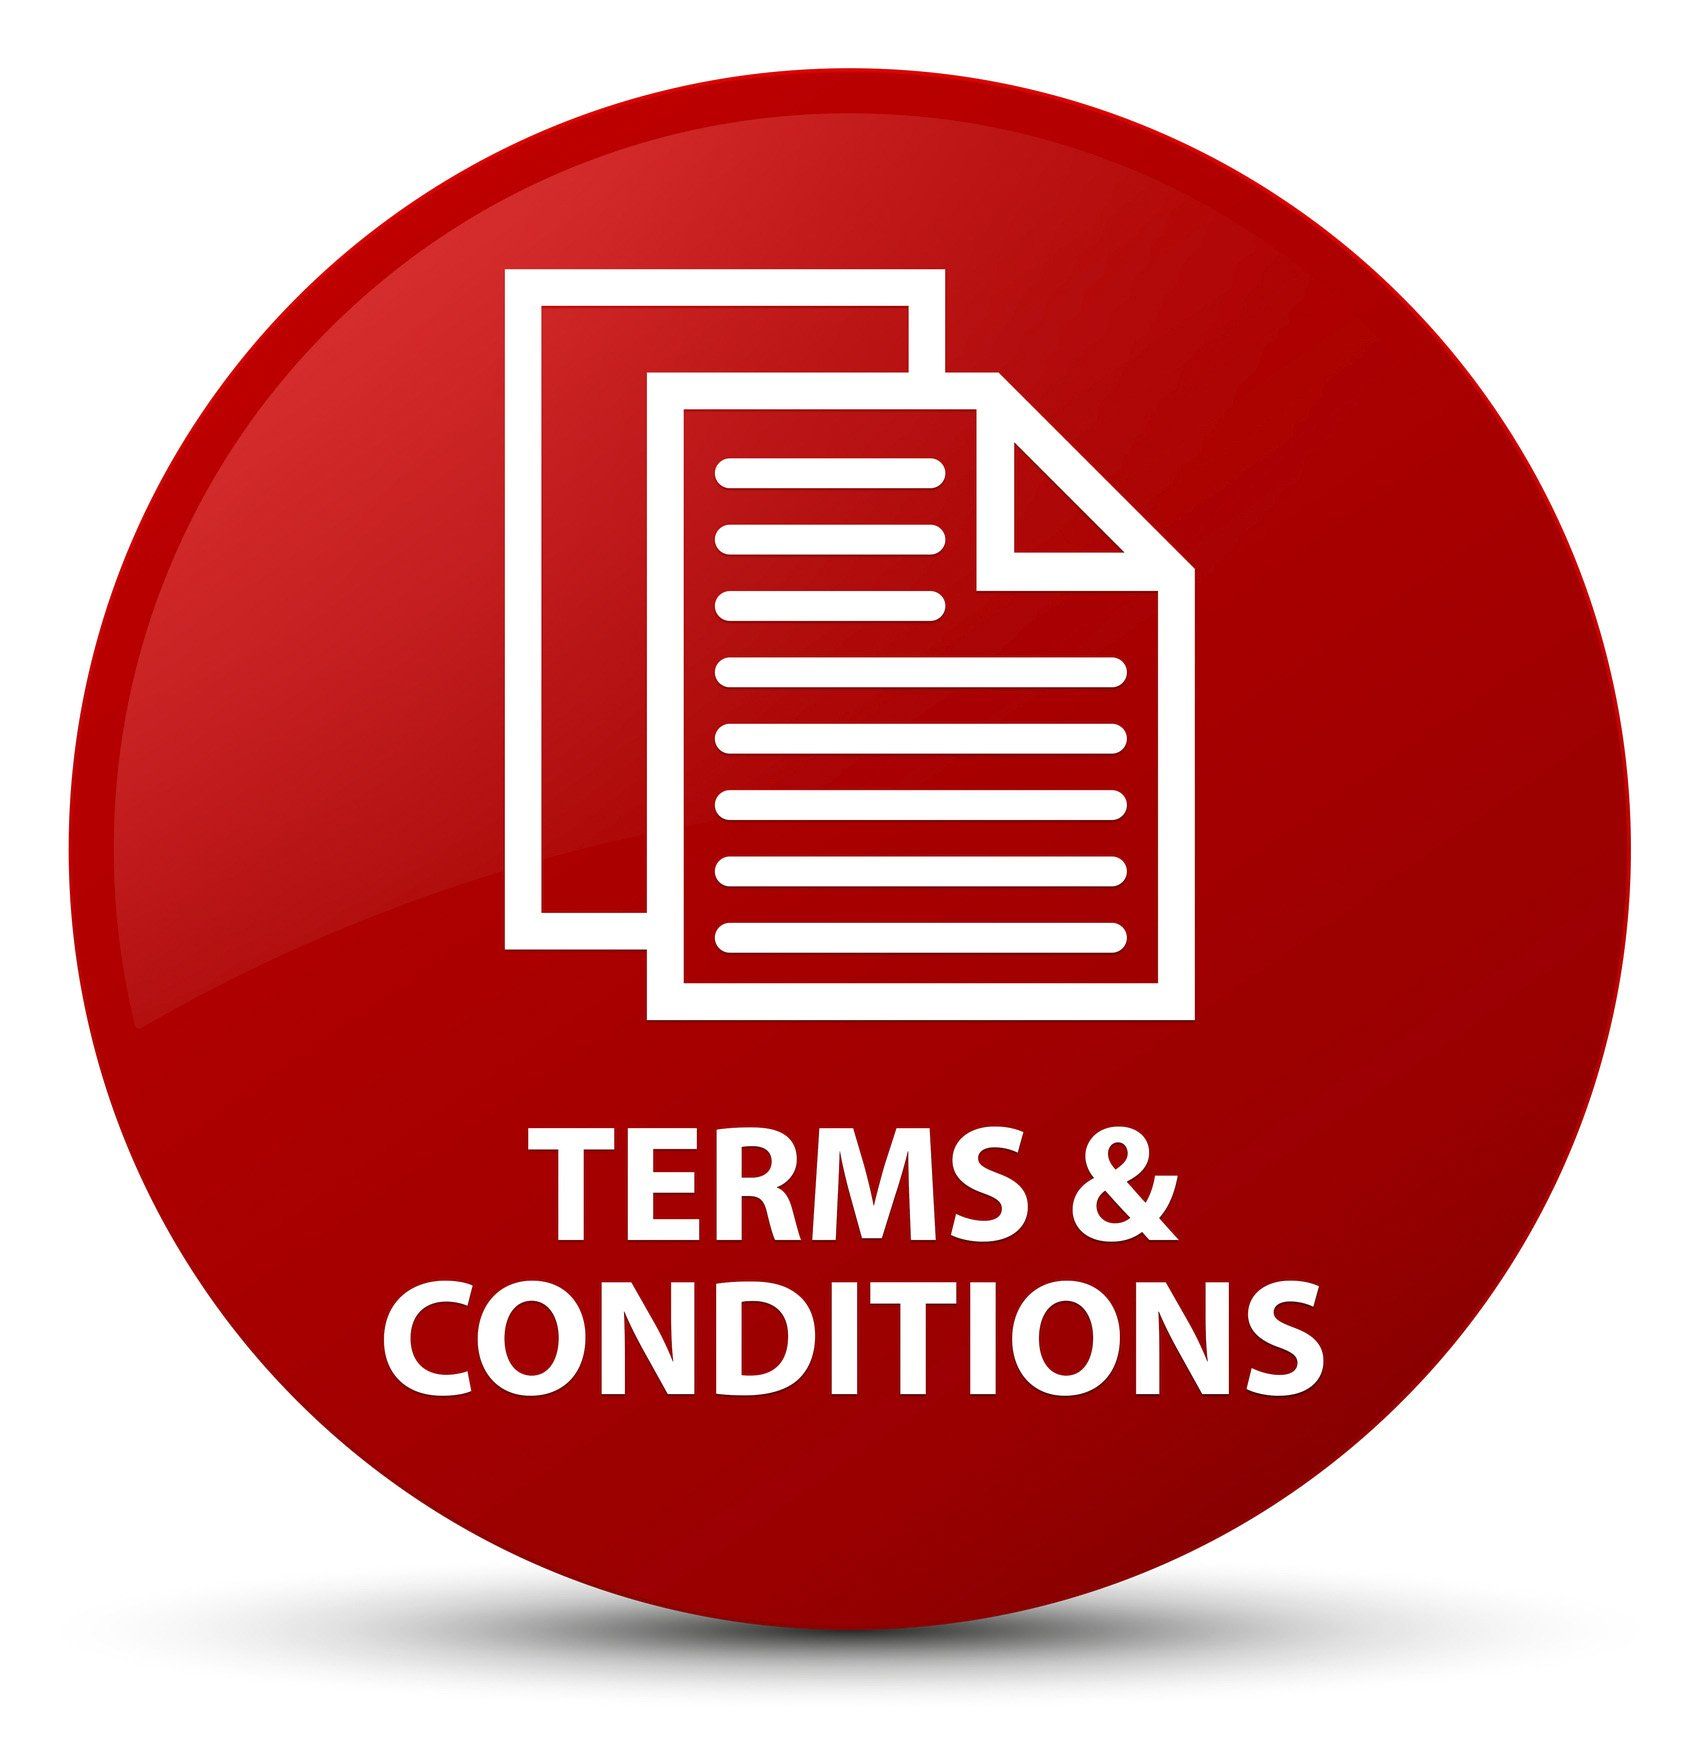 Terms and conditions (pages icon) red round button